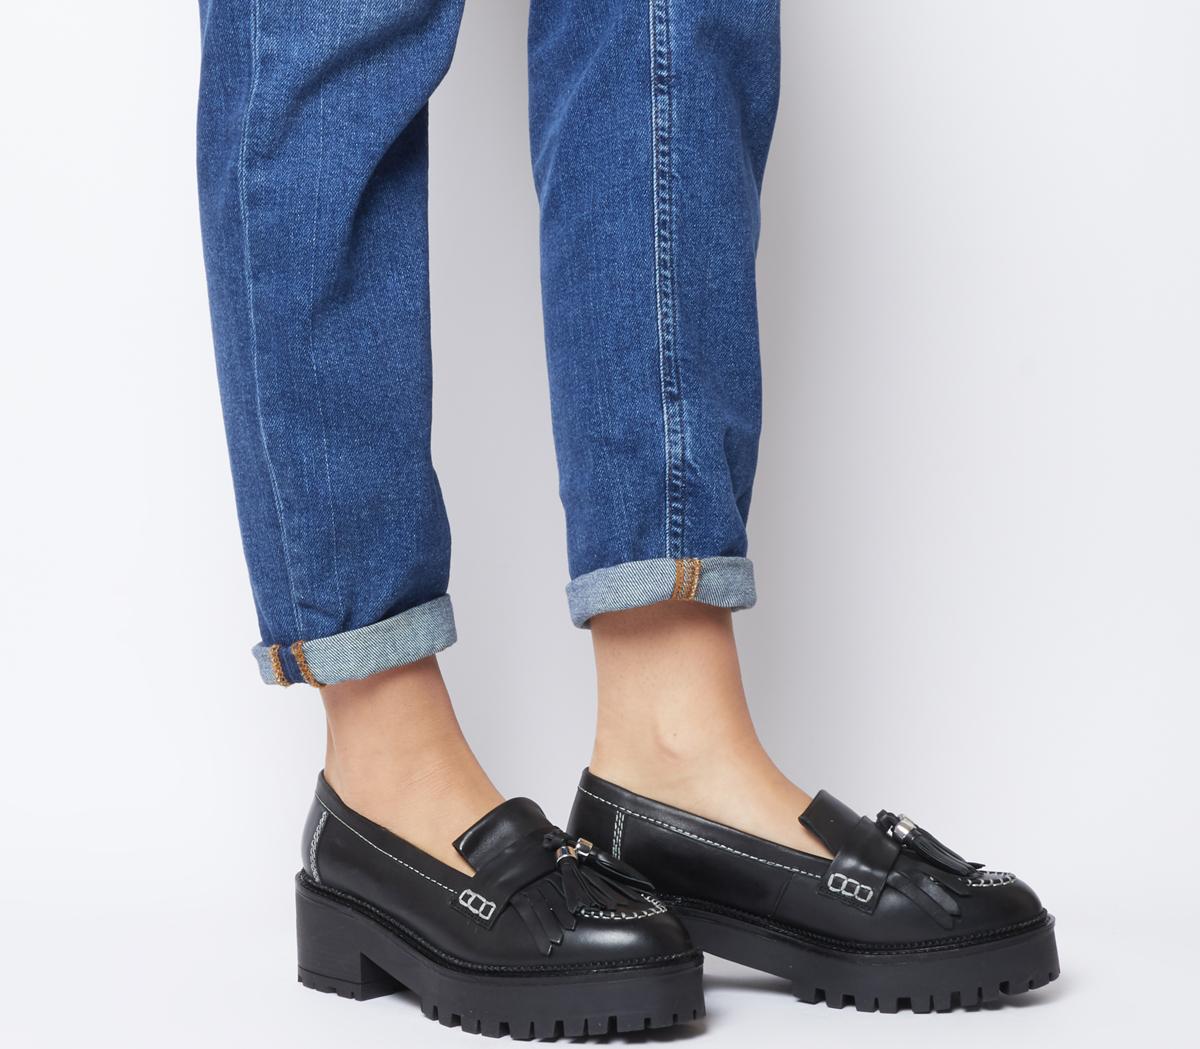 OFFICEMajority Chunky Loafer With TasselsBlack Leather